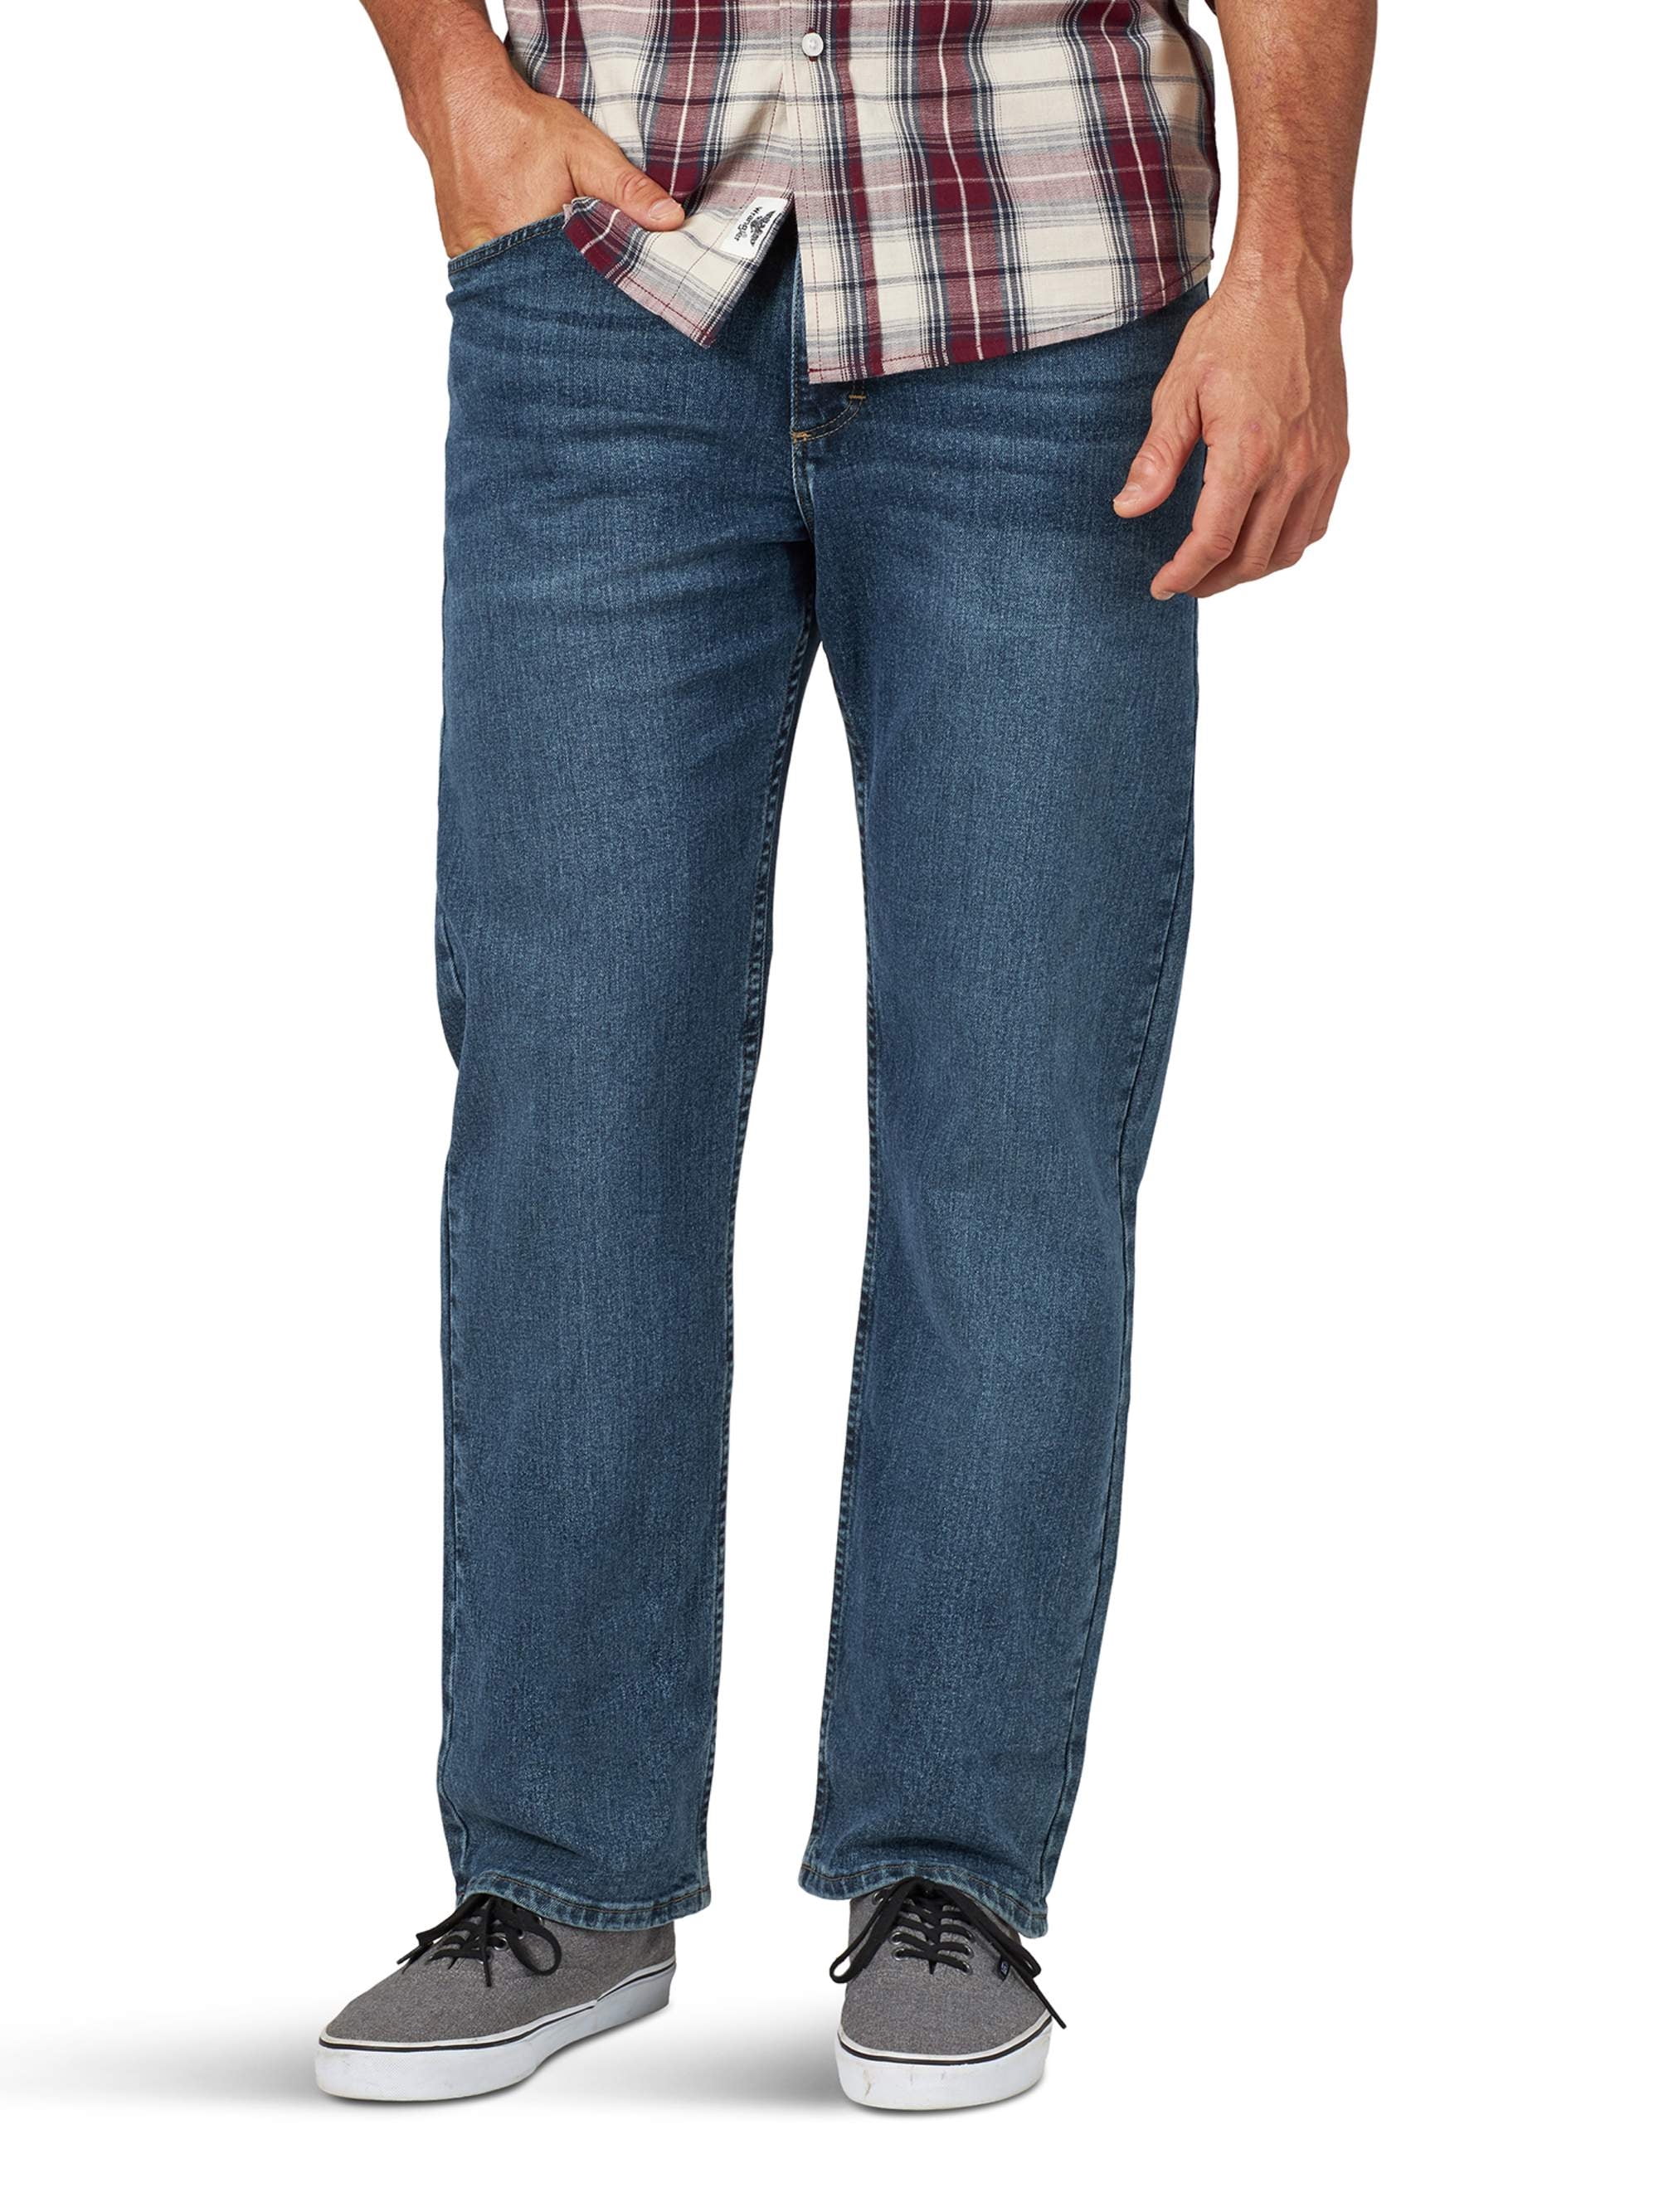 wrangler performance series relaxed fit jeans